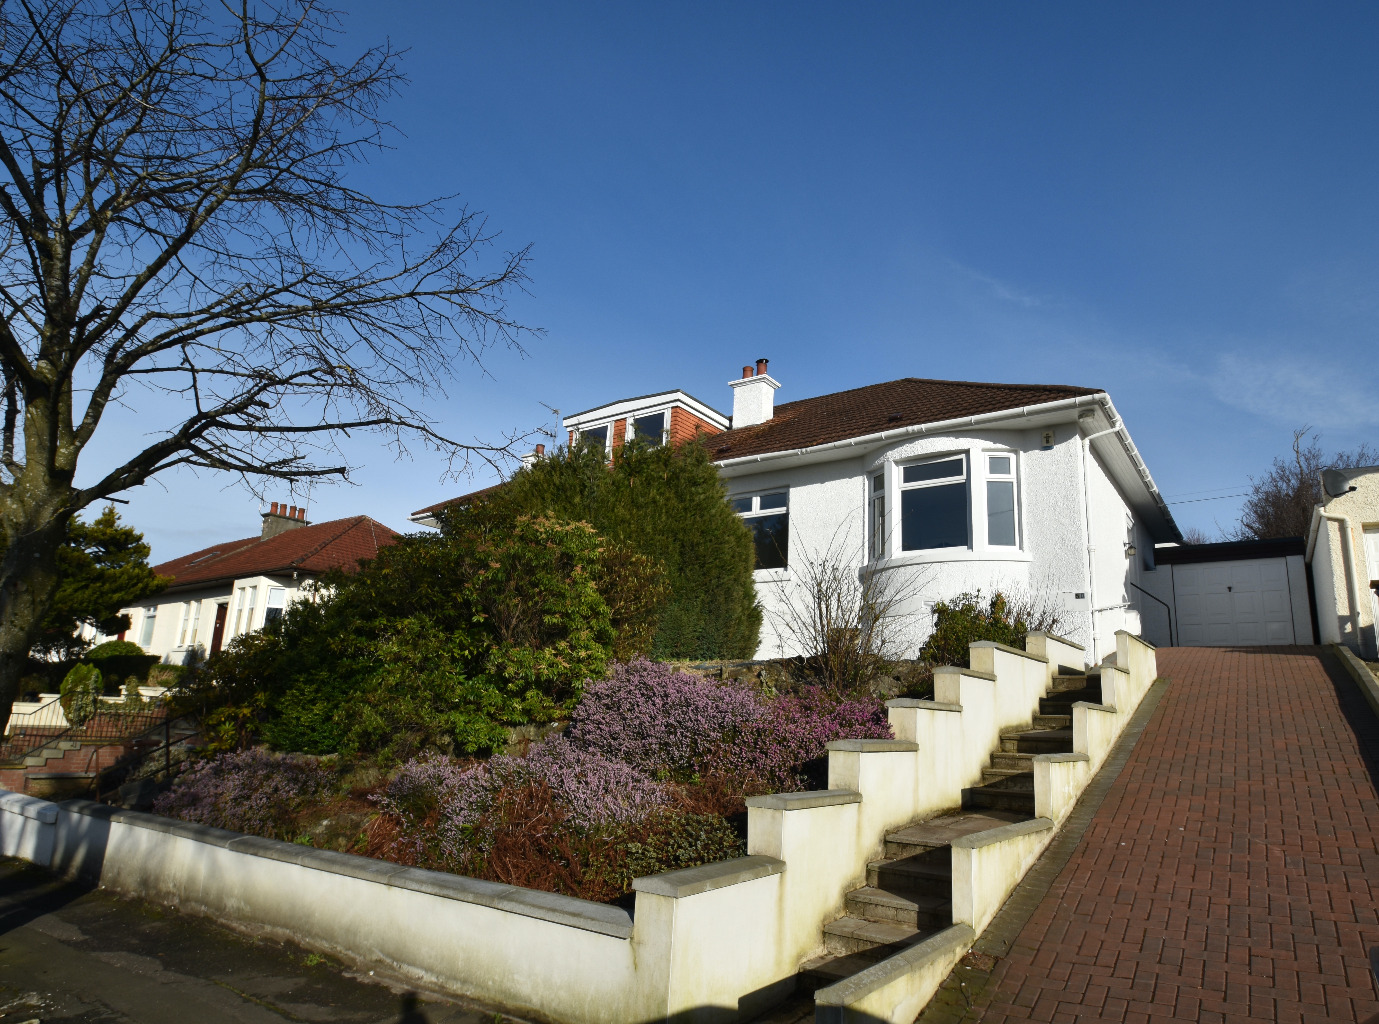 2 bed semi-detached bungalow for sale - Property Image 1